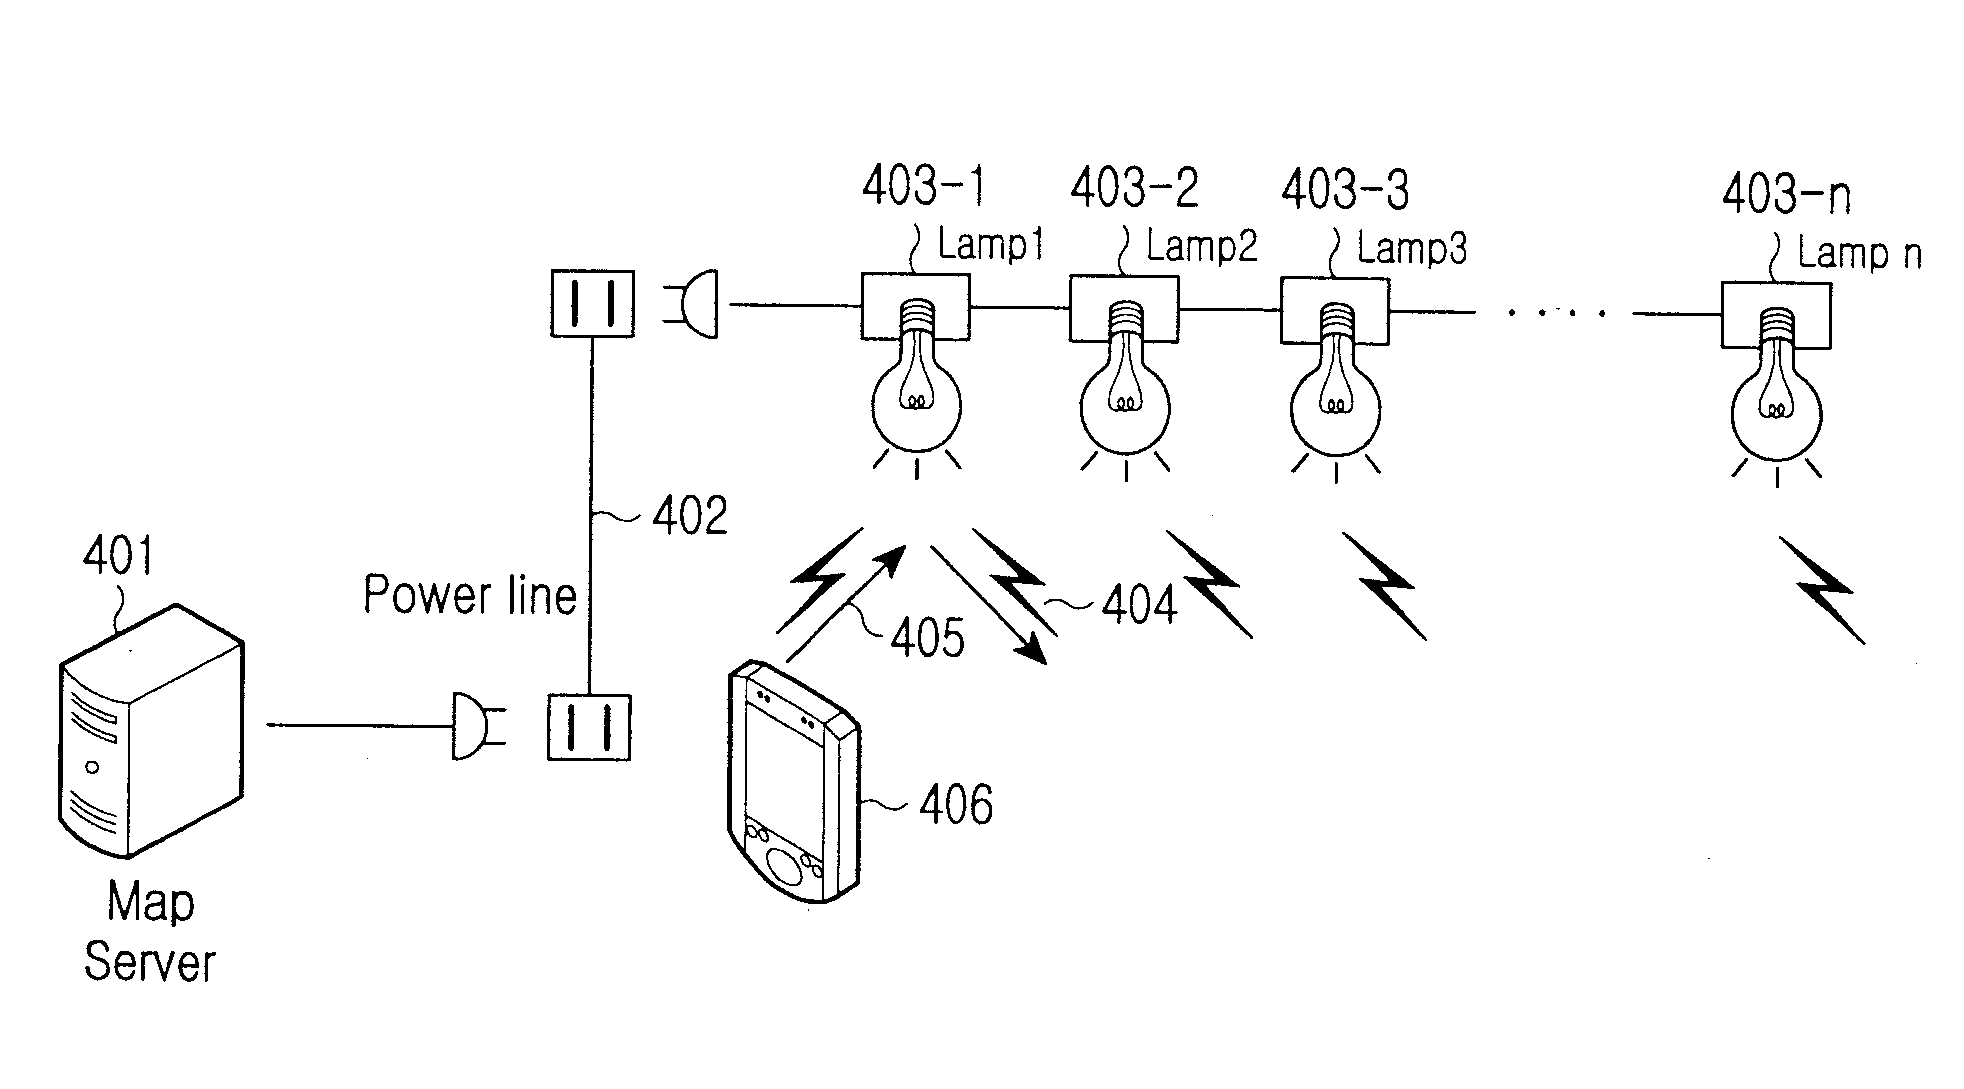 Method for exchanging messages in a navigation system using visible light communications